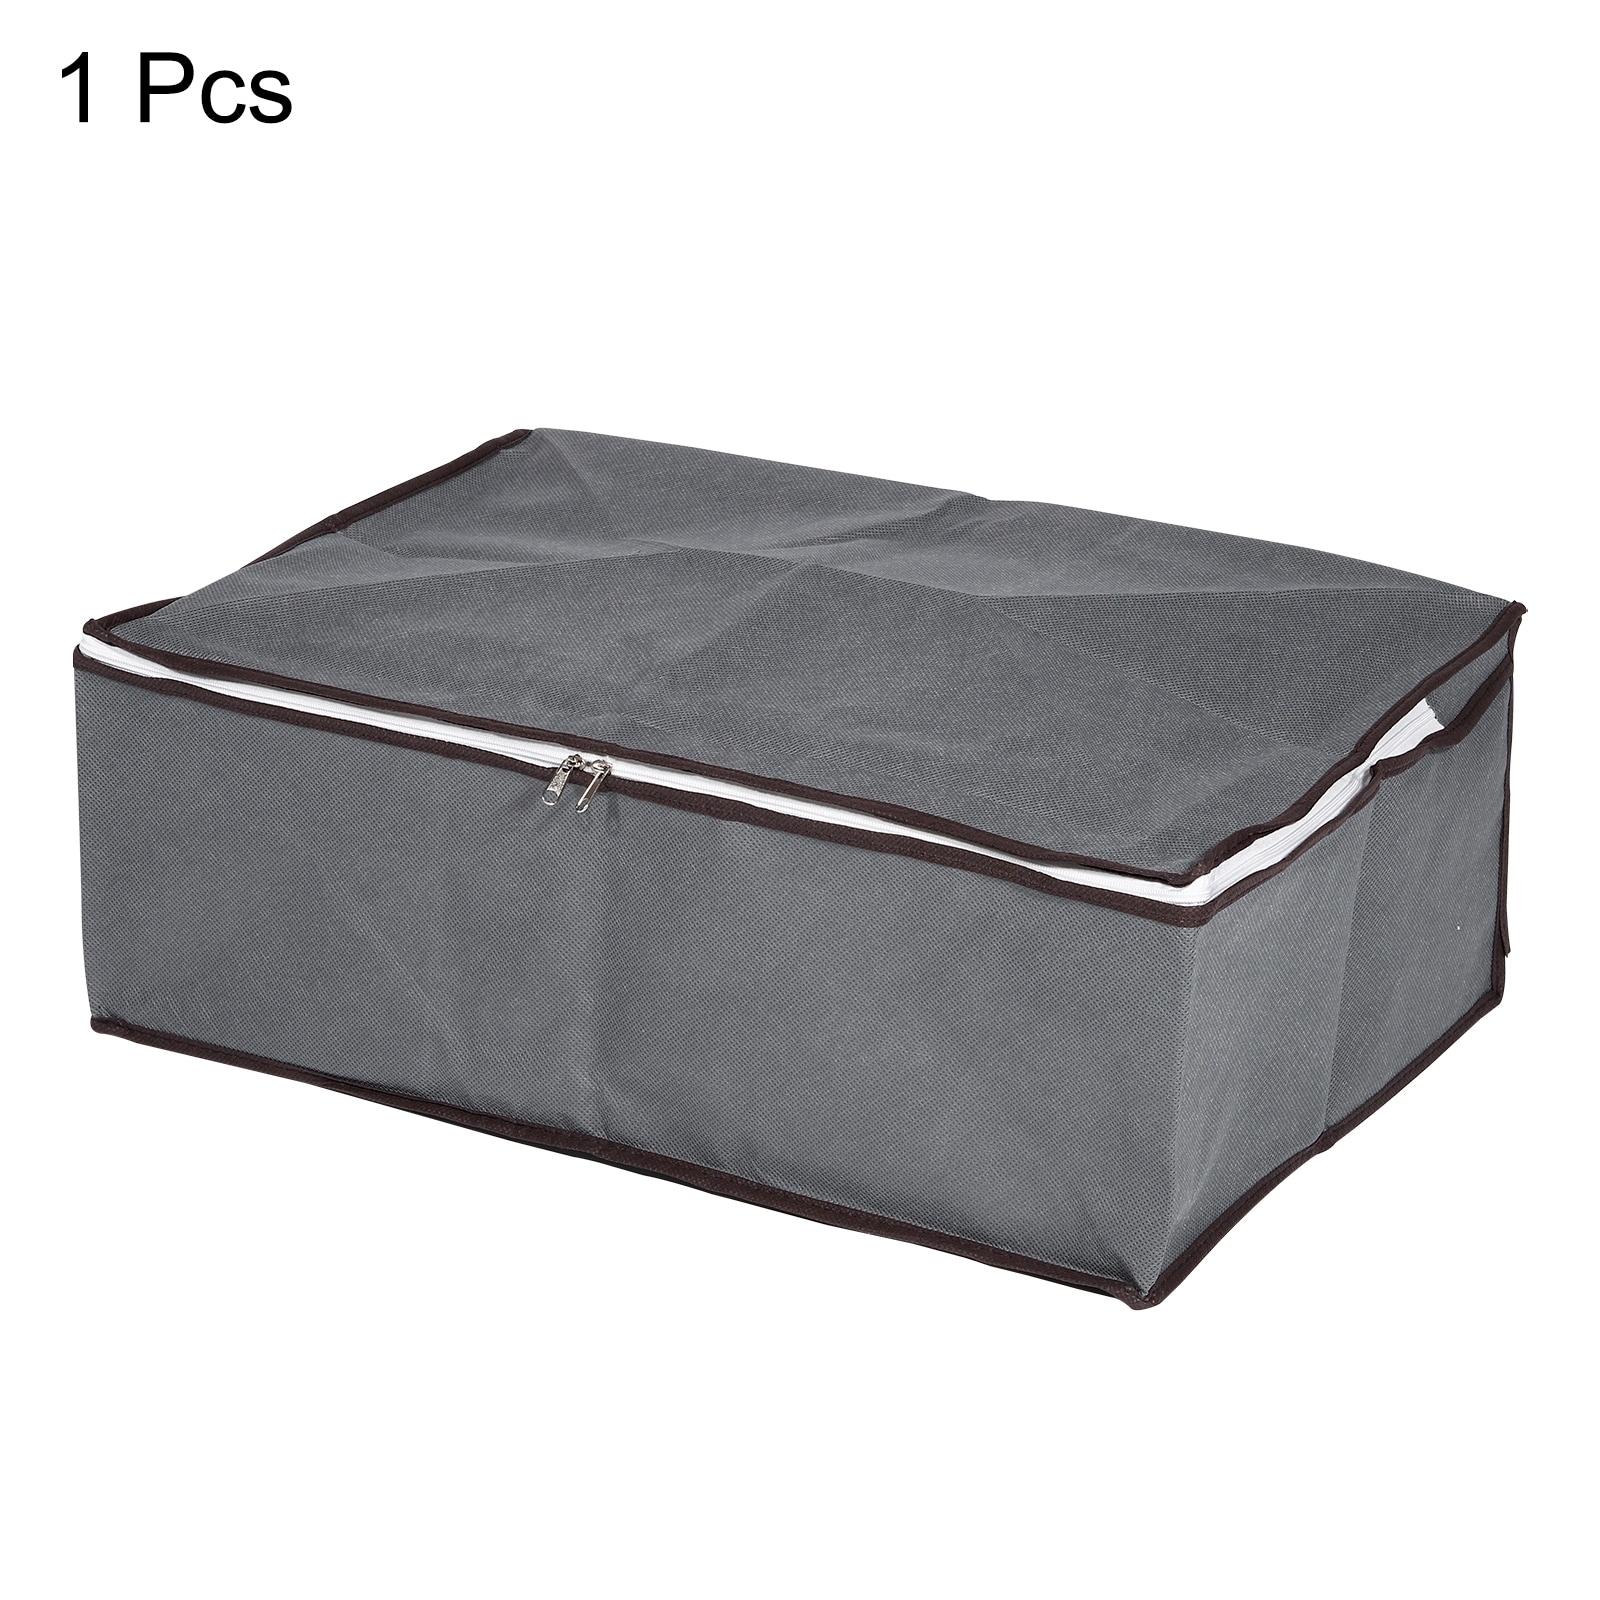 https://ak1.ostkcdn.com/images/products/is/images/direct/c094d41ef83773a6c1d984f0a76515bd1547b2c1/Storage-Tote-Bag-19.7%22-Length-Heavy-Moving-Tote-Bags-with-Zippers%2C-Gray.jpg